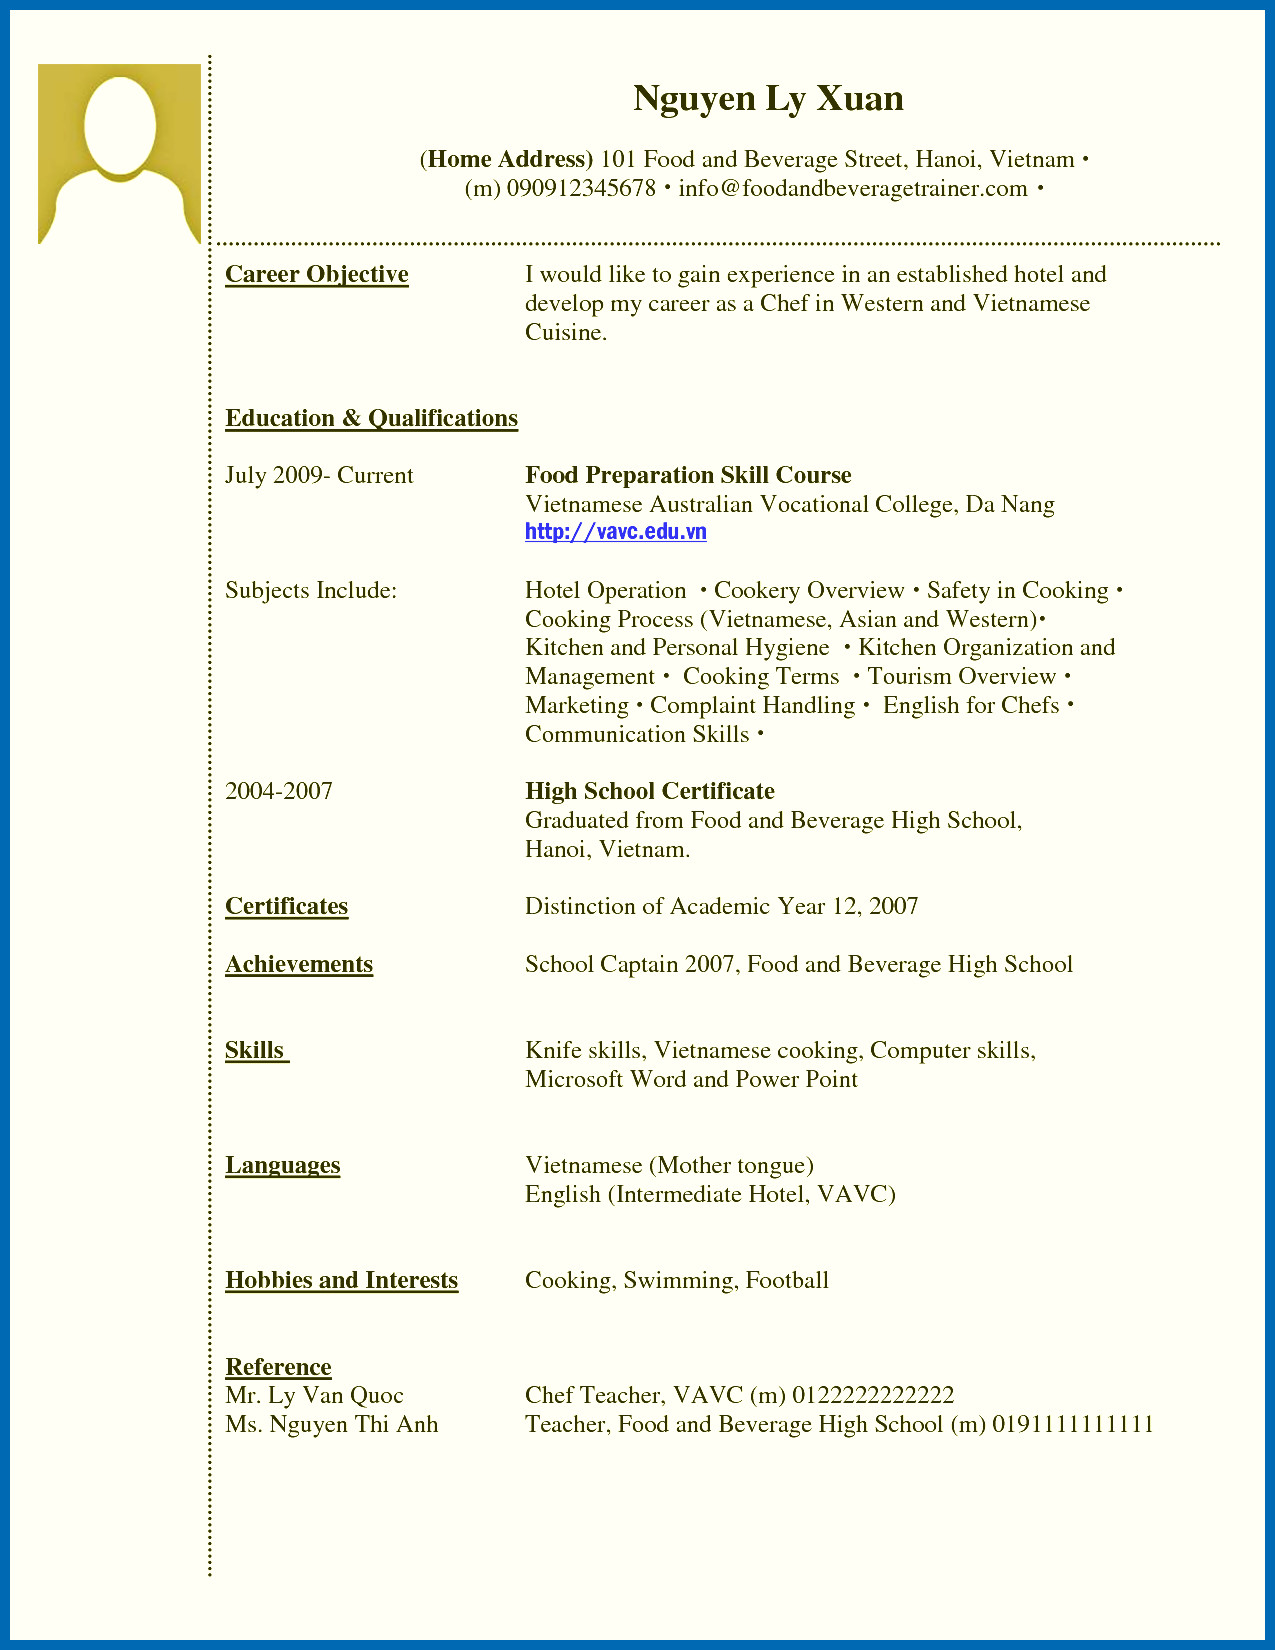 Sample Resume format for Students with No Experience 12 13 Cv Samples for Students with No Experience